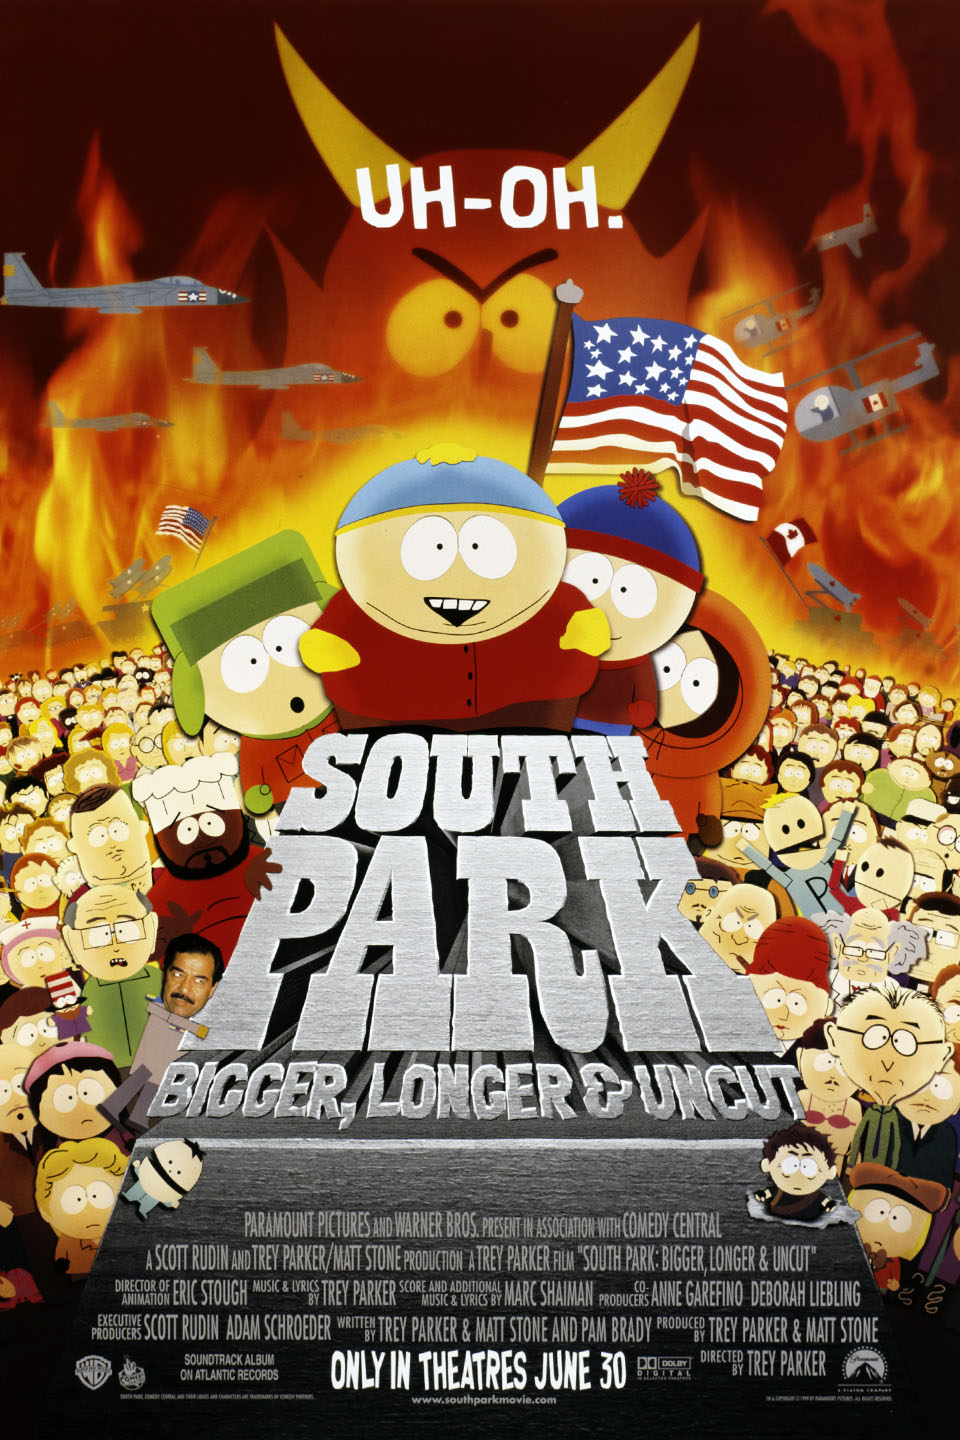 South Park The Movie Trailer 1 Trailers & Videos Rotten Tomatoes